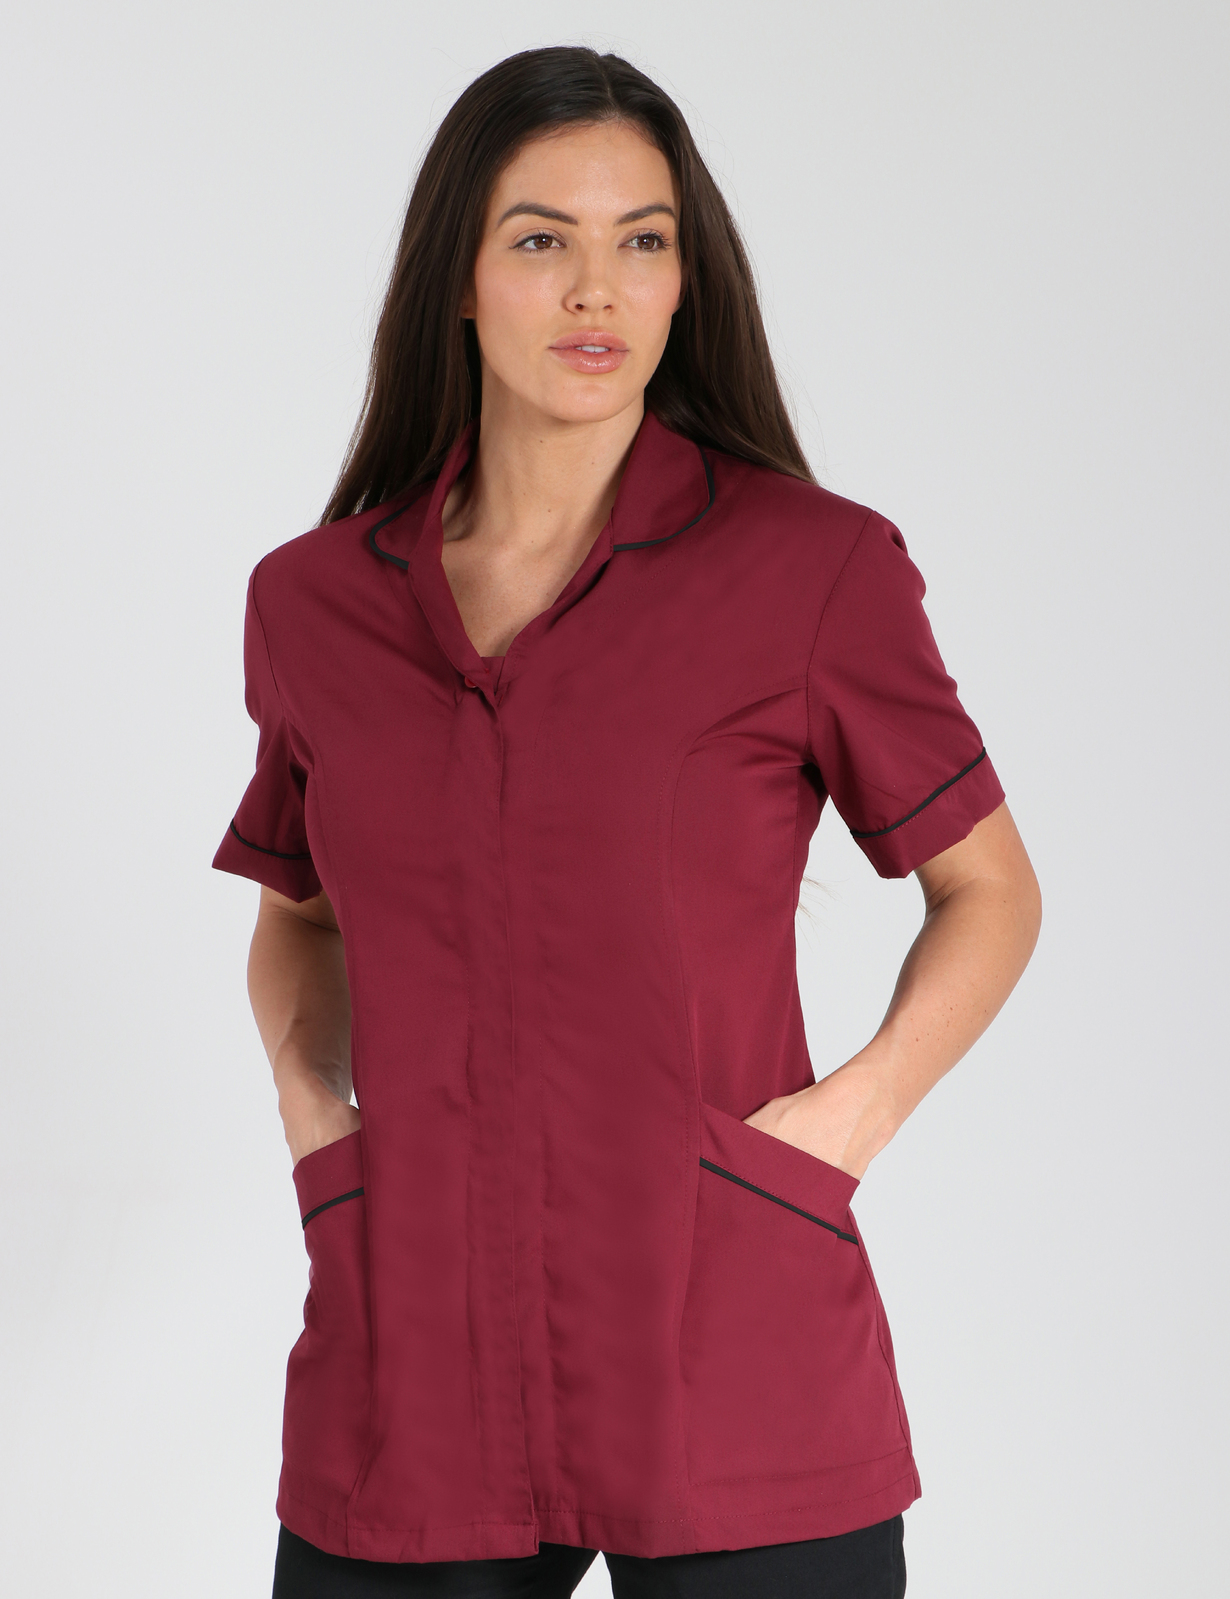 Bonnie Style Tunic Top with Contrast Trim